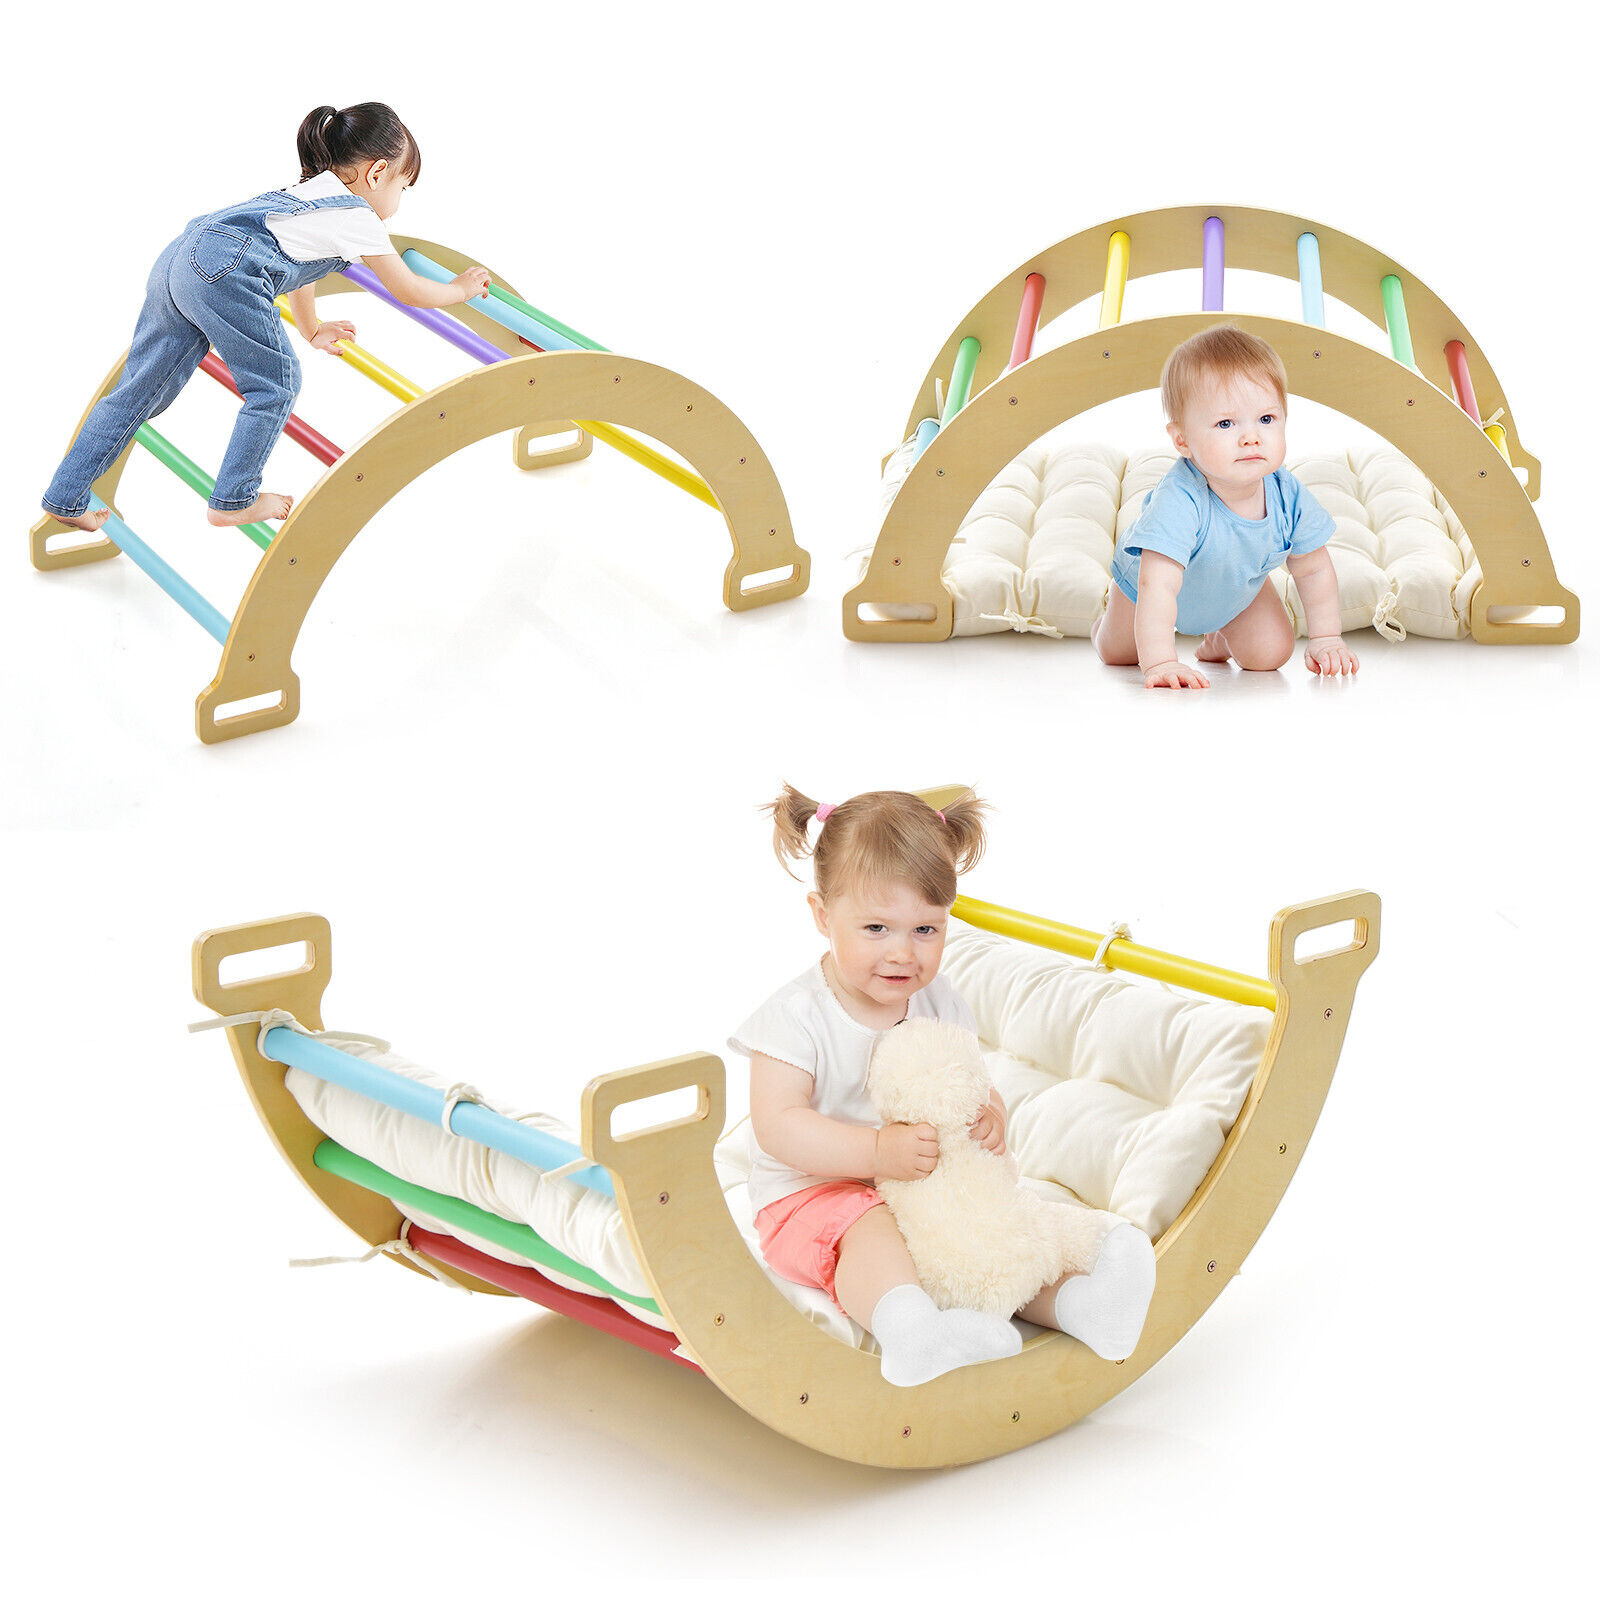 2-in-1 Arch Rocker with Soft Cushion-Colourful